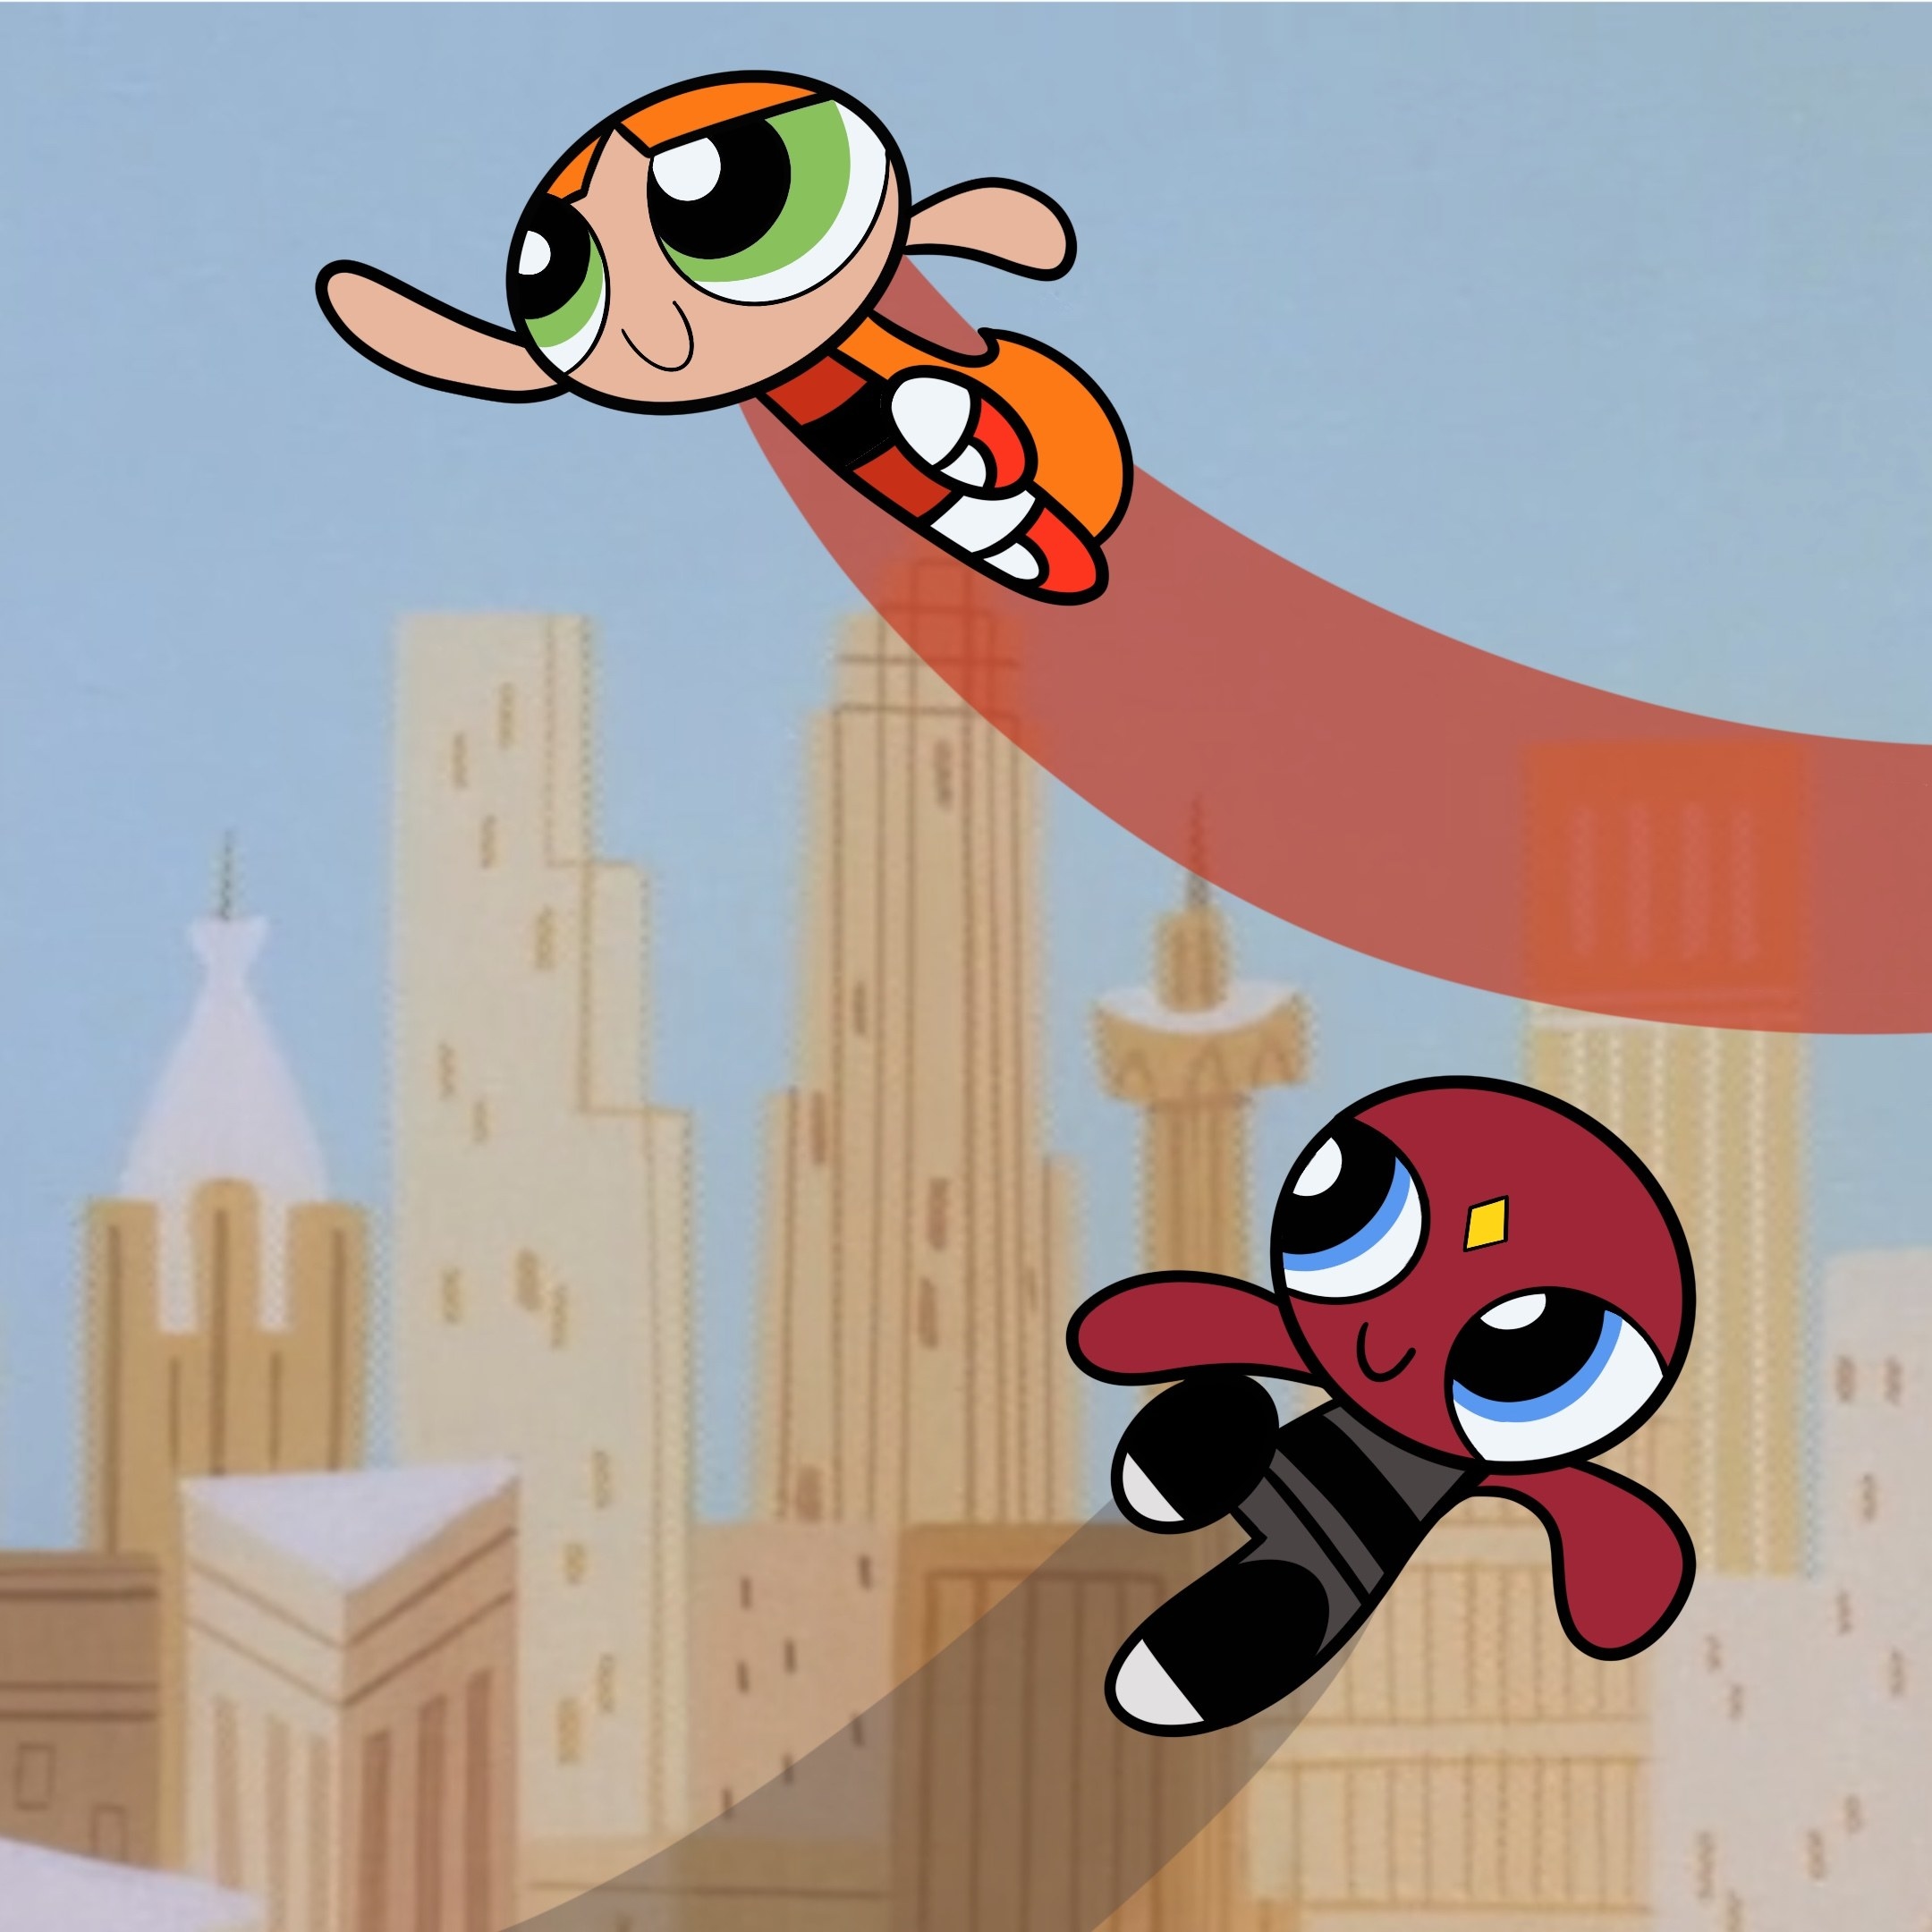 Wanda and Vision drawn in the style of The Powerpuff Girls